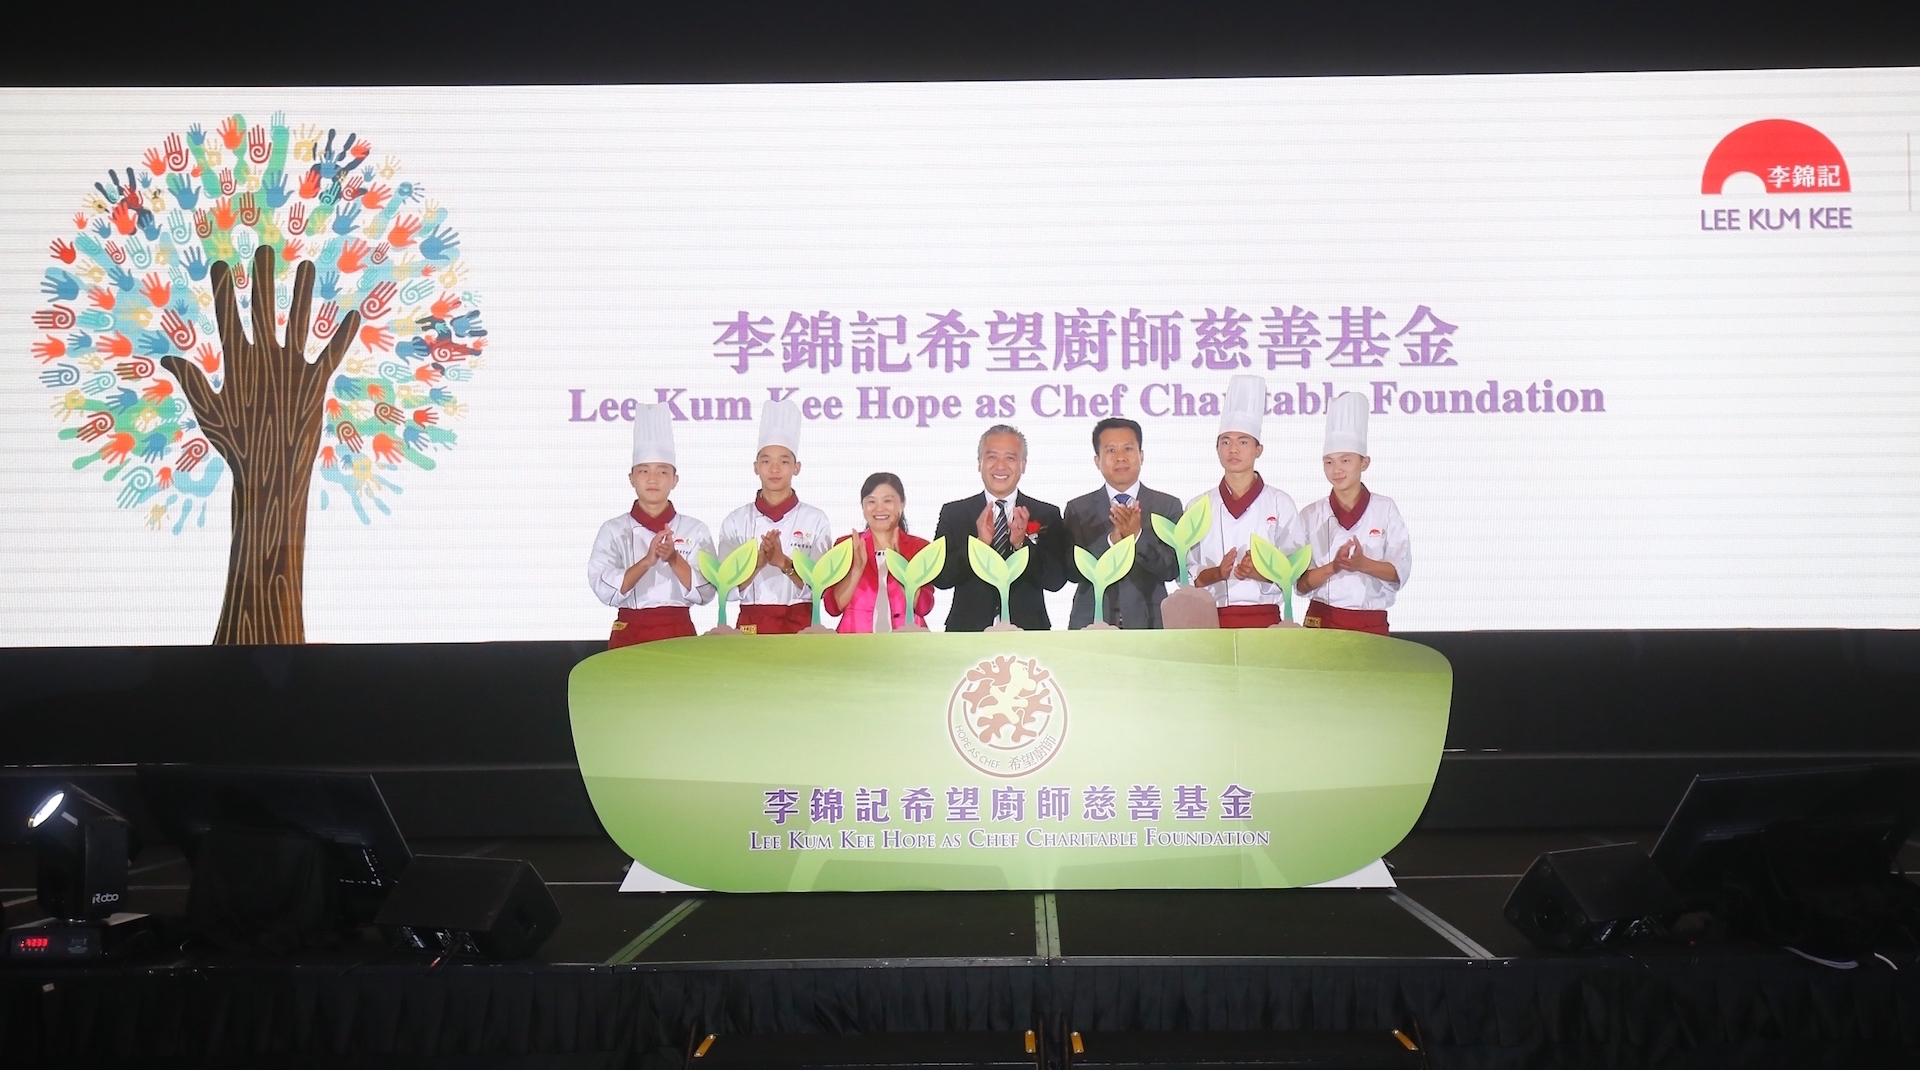 Lee Kum Kee International Young Chef Chinese Culinary Challenge 2018